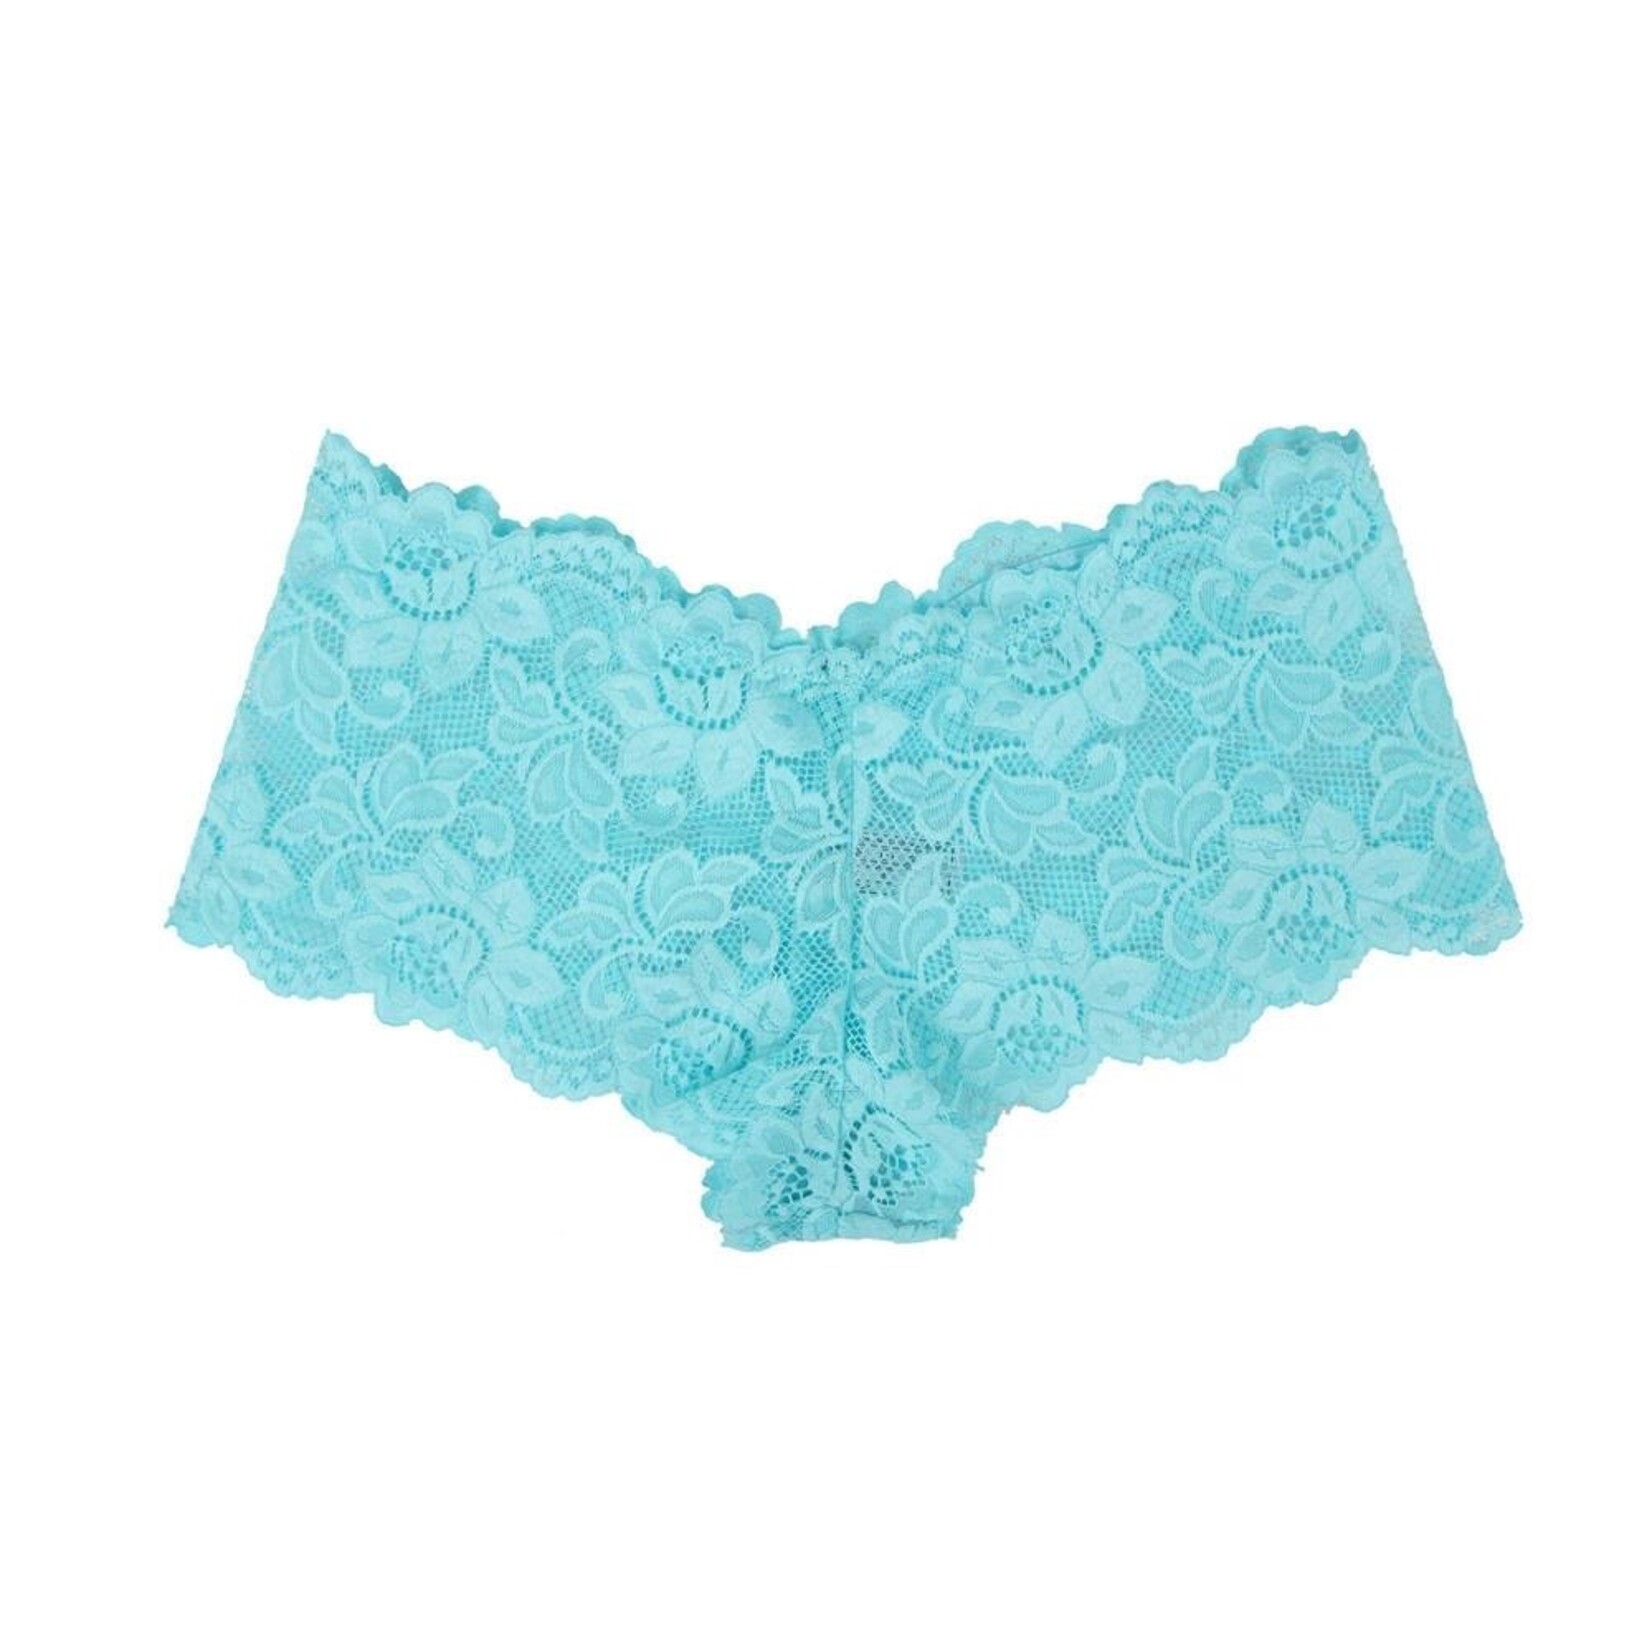 OH YEAH! -  BLUE SEXY FLORAL LACE PANTY 2XL